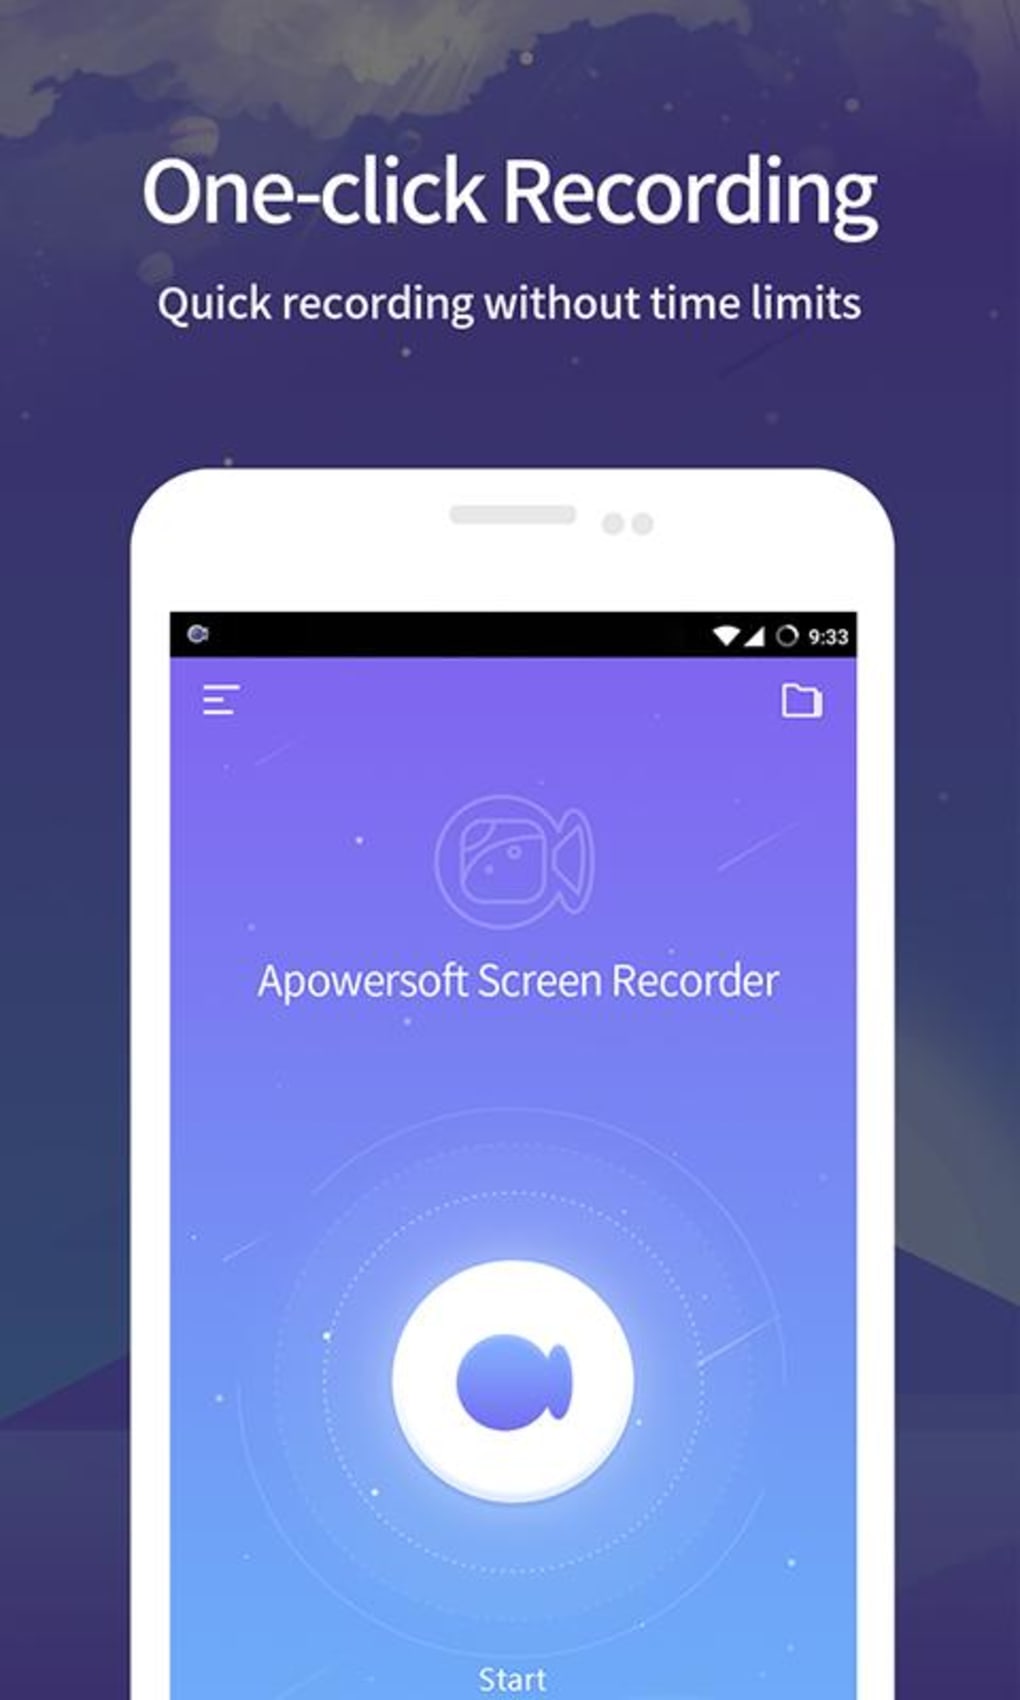 download the last version for android Aiseesoft Screen Recorder 2.8.22